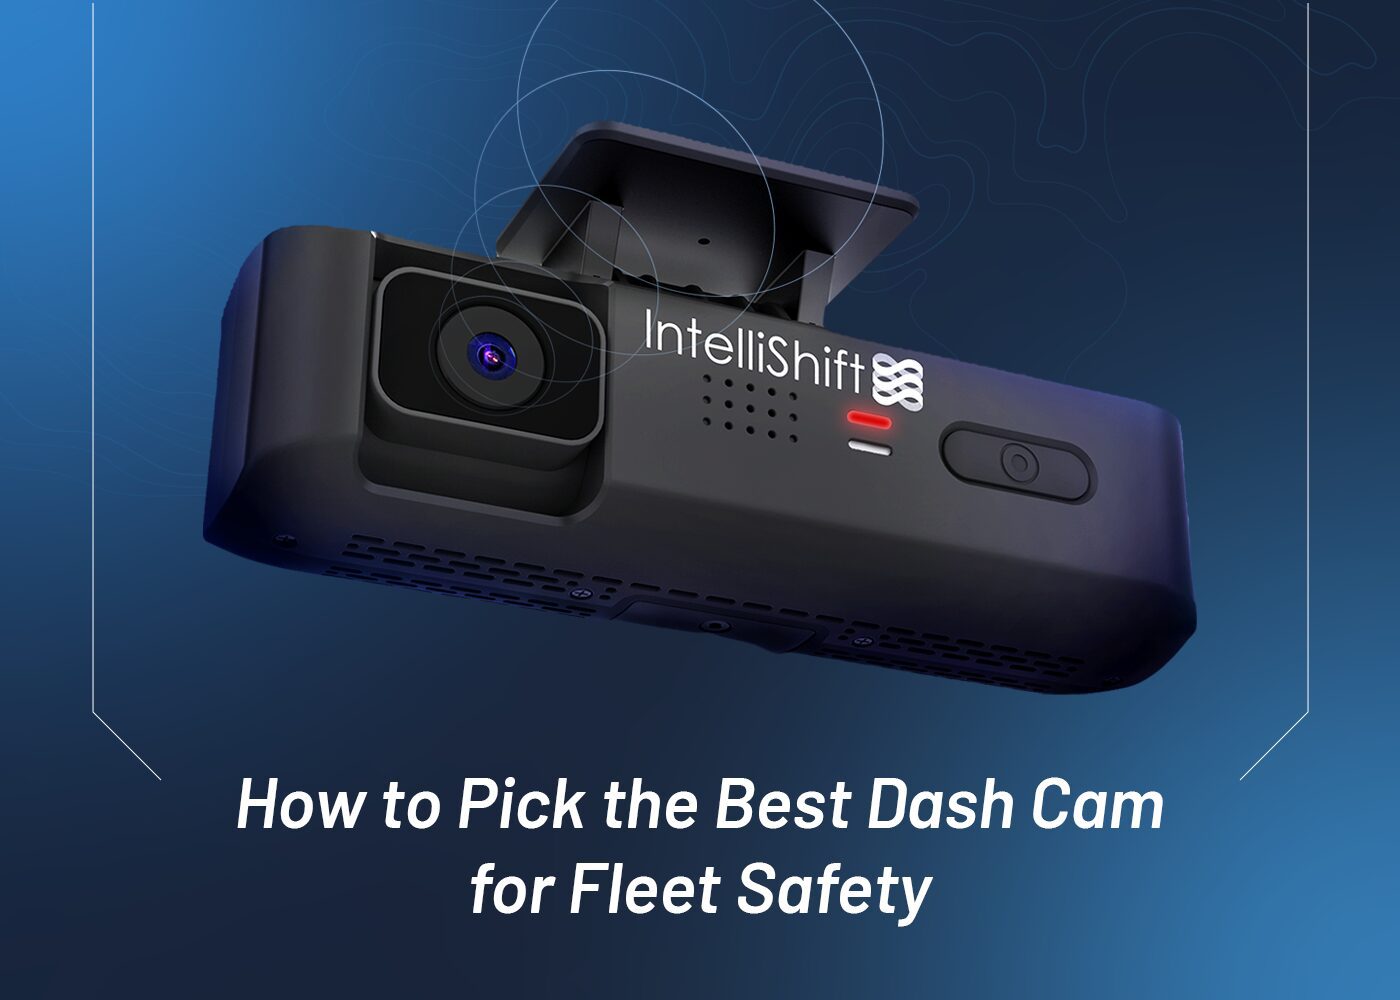 How to Pick the Best Dash Cam for Fleet Safety